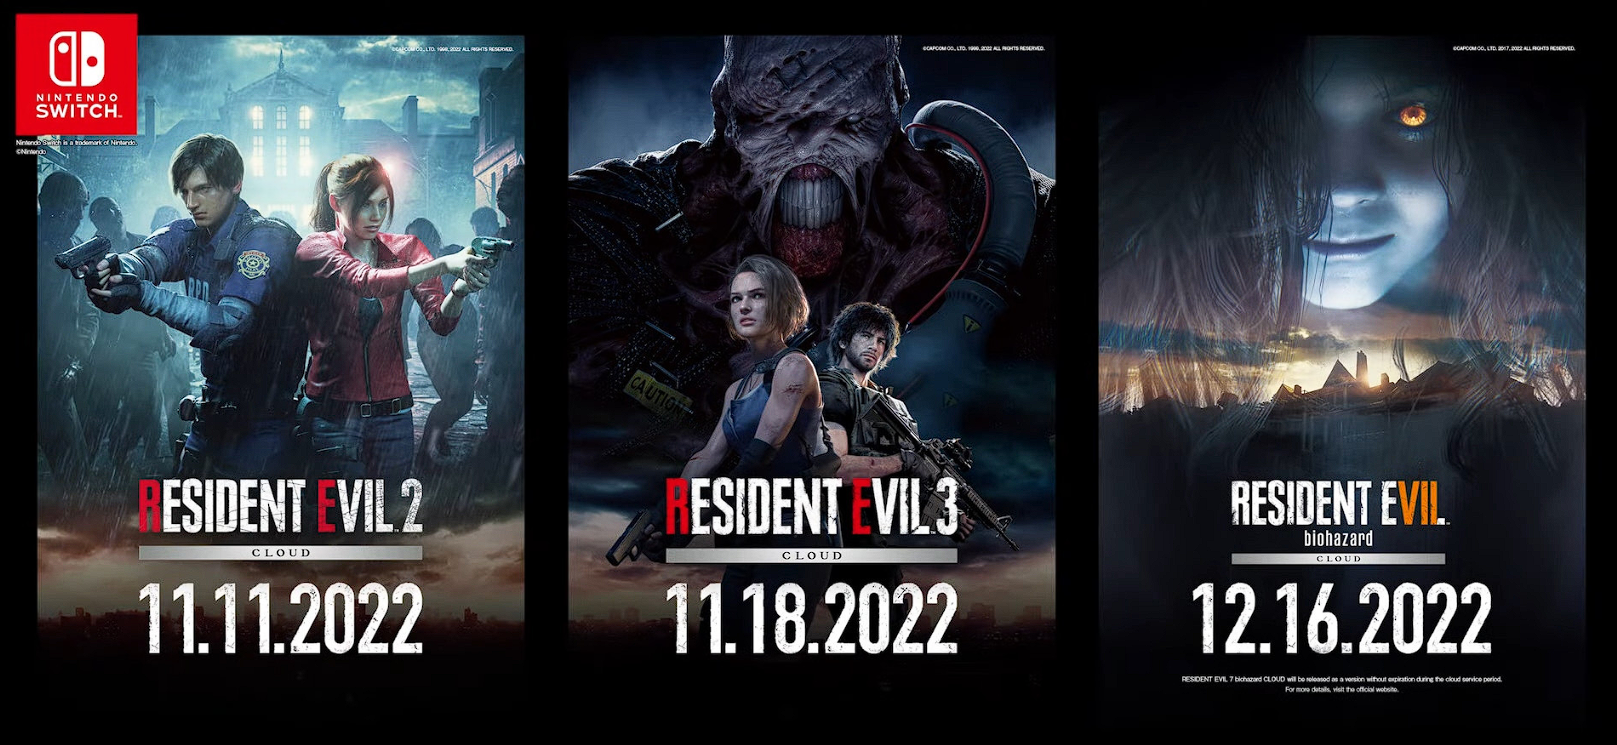 Resident Evil Village Playstation 5 Related Announcement to Come During  Next Event; Resident Evil 2,3 and 7 Are Not Coming to Nintendo Switch Due  to Engine Issues - Rumor